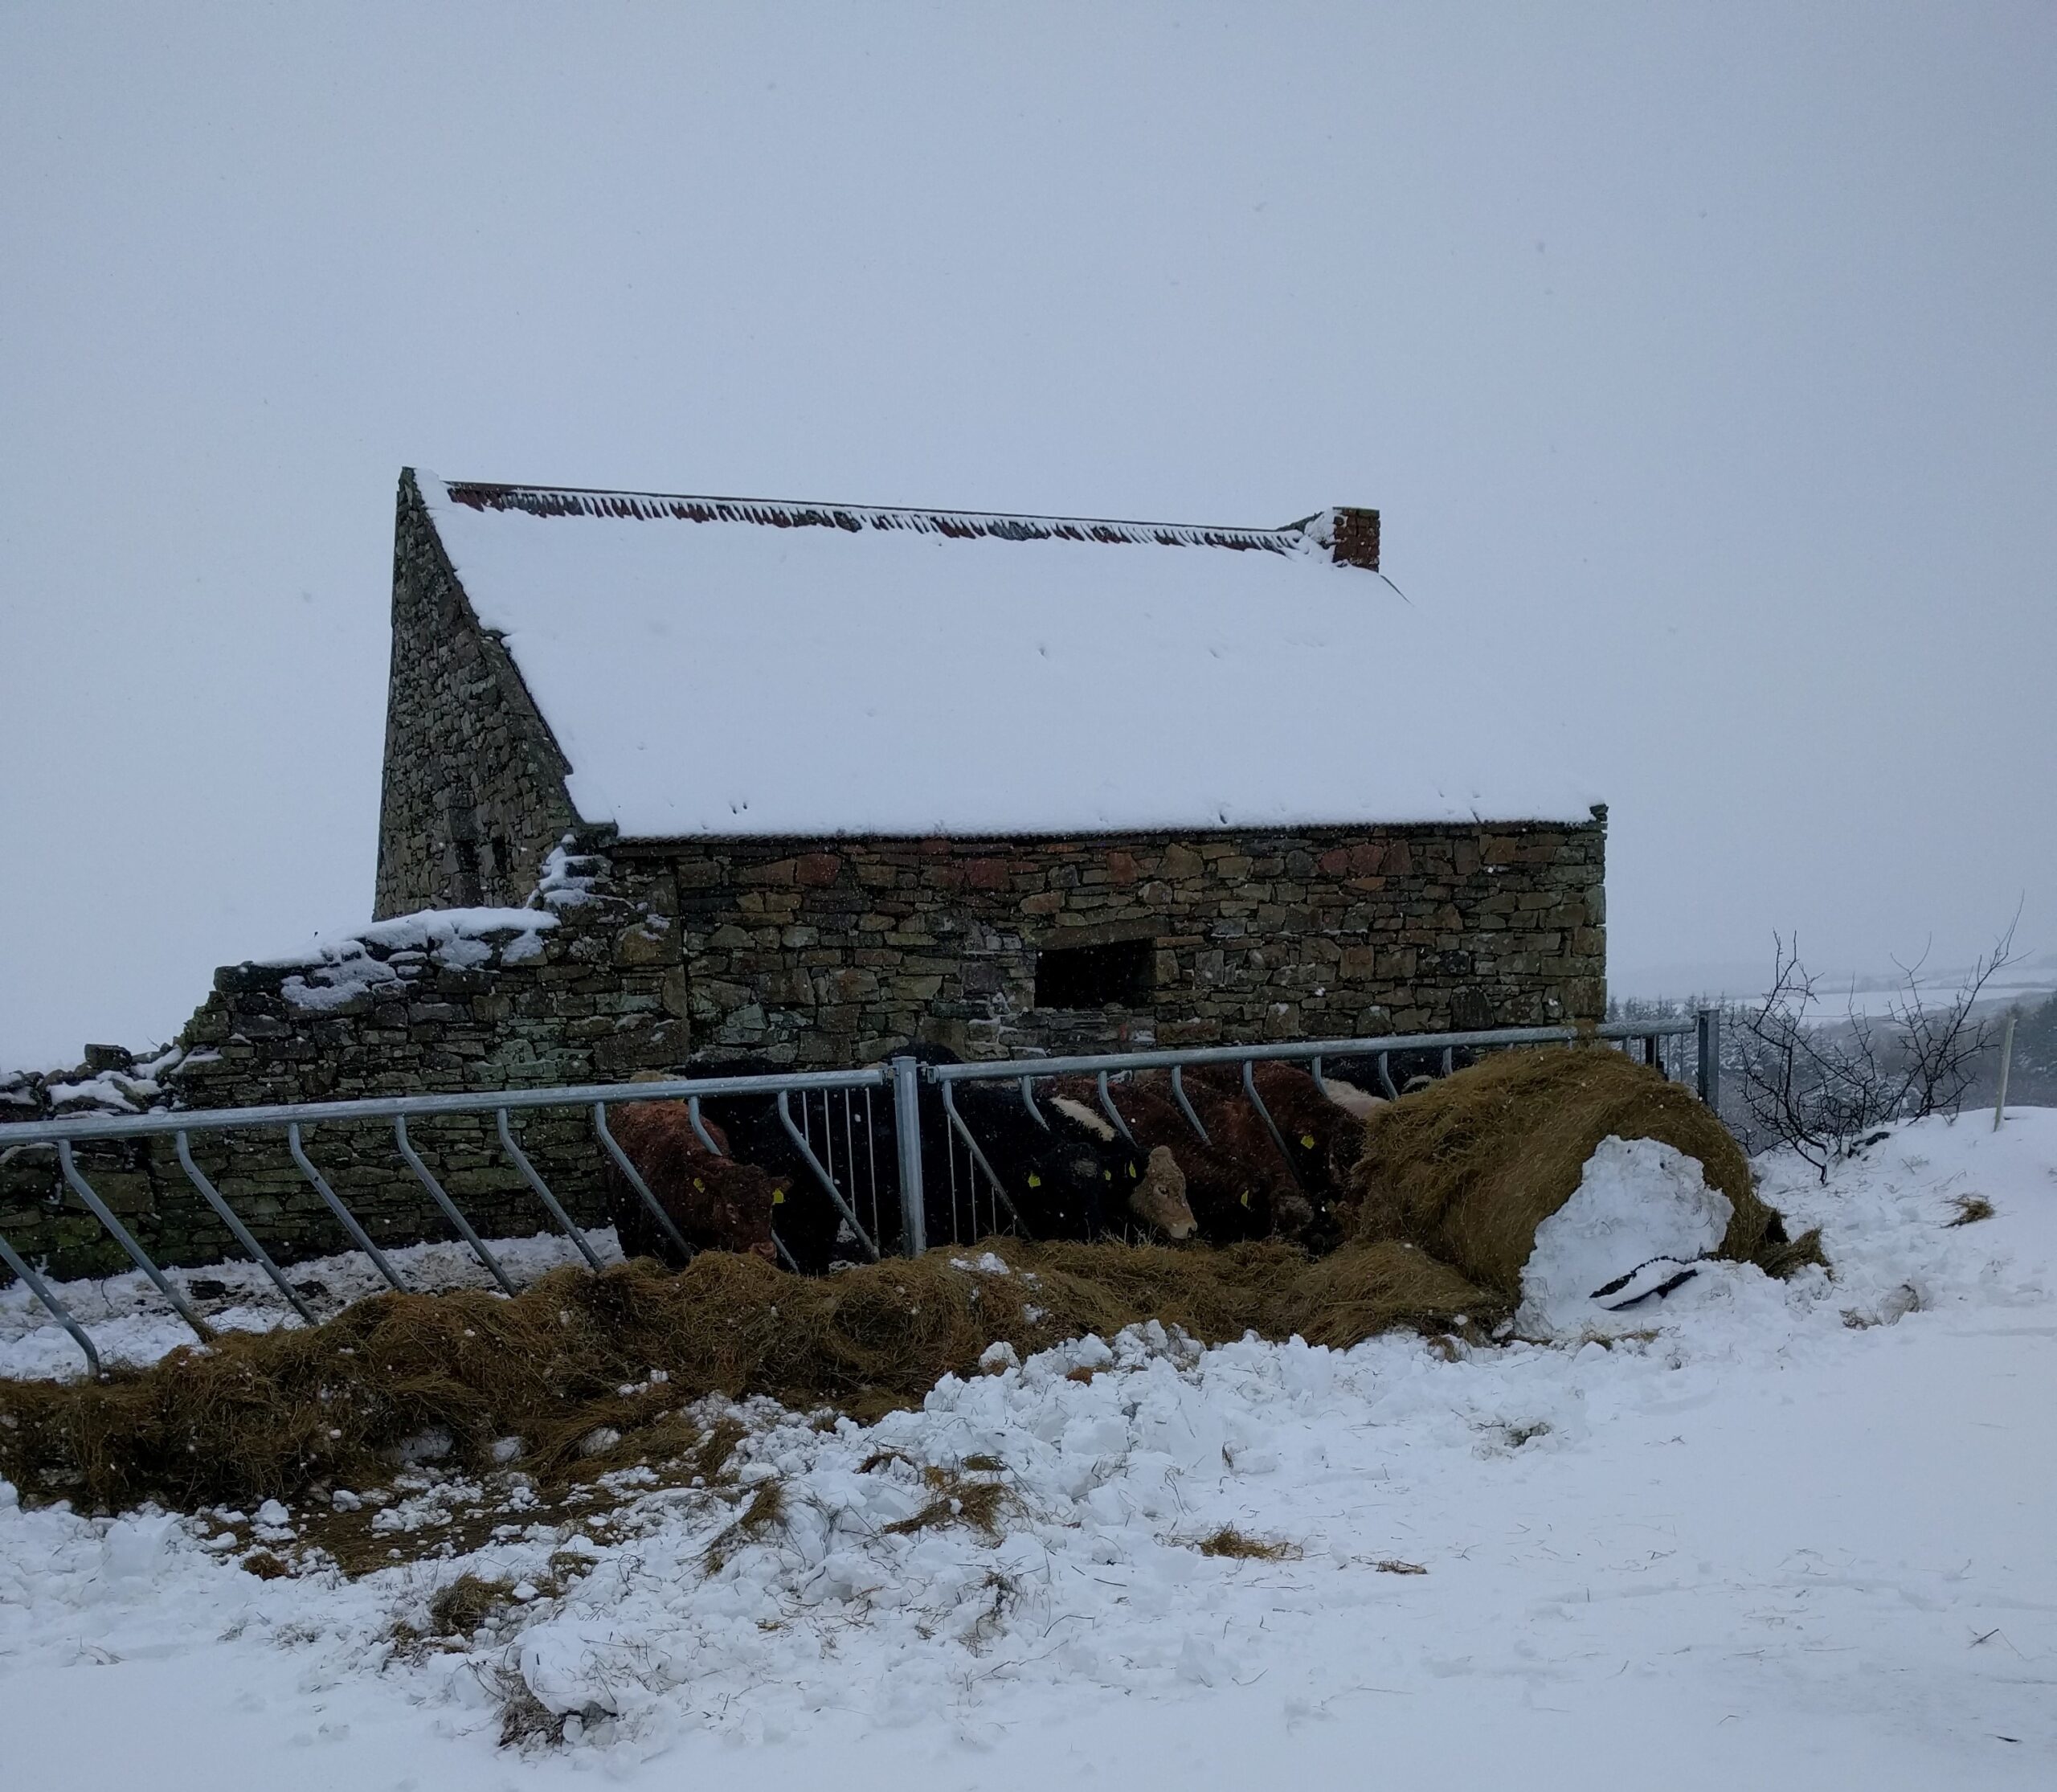 Cattle and shed in snow